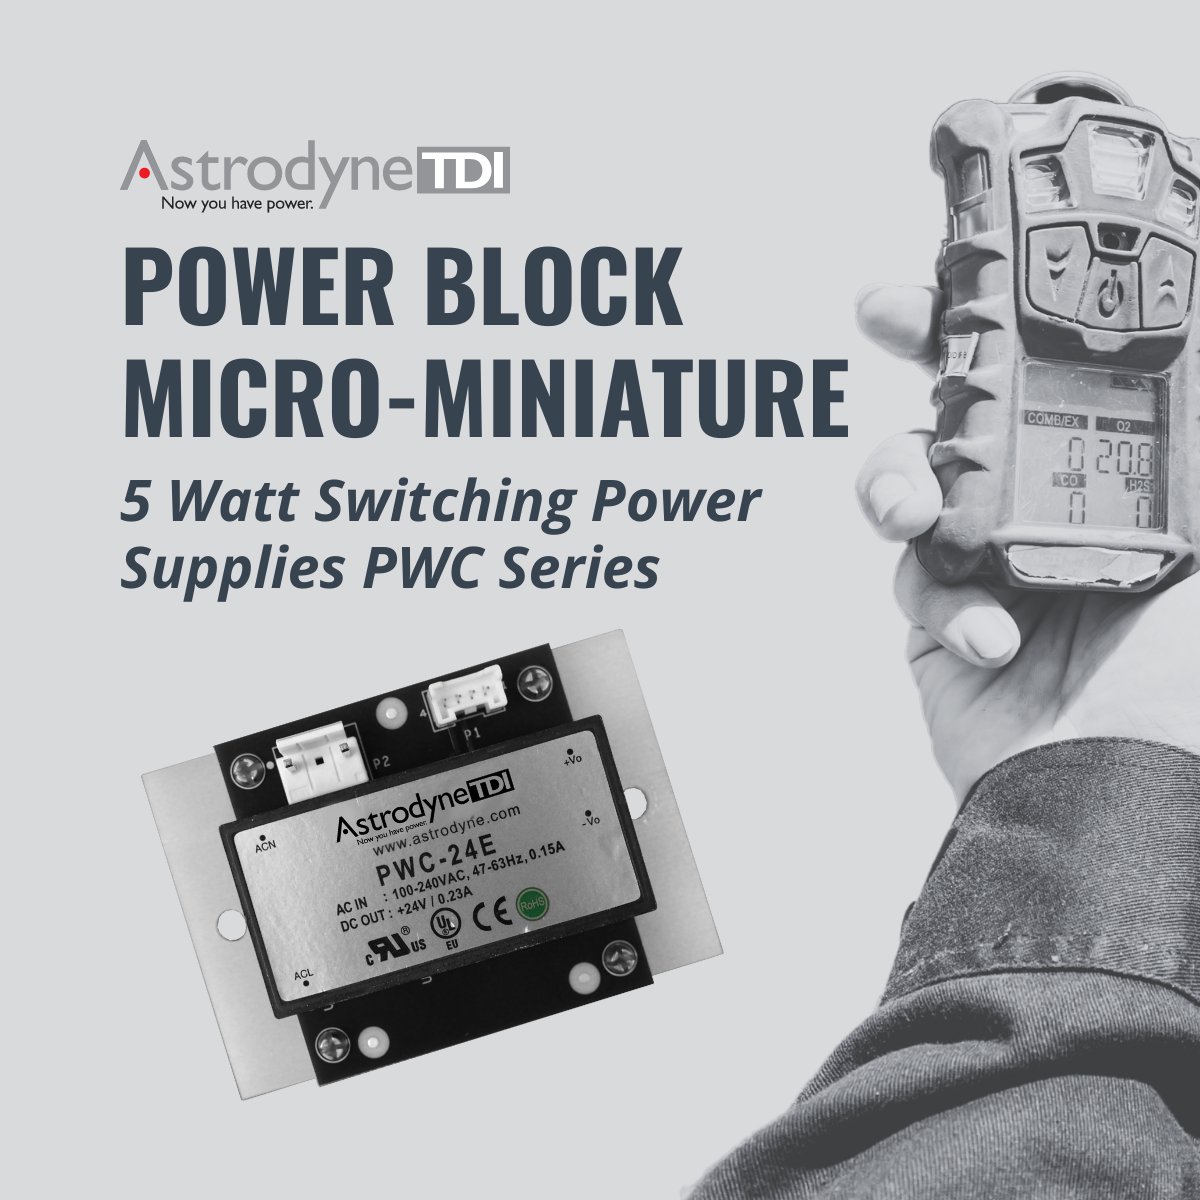 Calling all industrial product designers! Looking for a compact, low power solution? Our 5W output power supplies have you covered. Wide input range, high safety certifications, and top-notch quality -💡🔌 #IndustrialDesign #PowerSupply

hubs.ly/Q02vZchn0